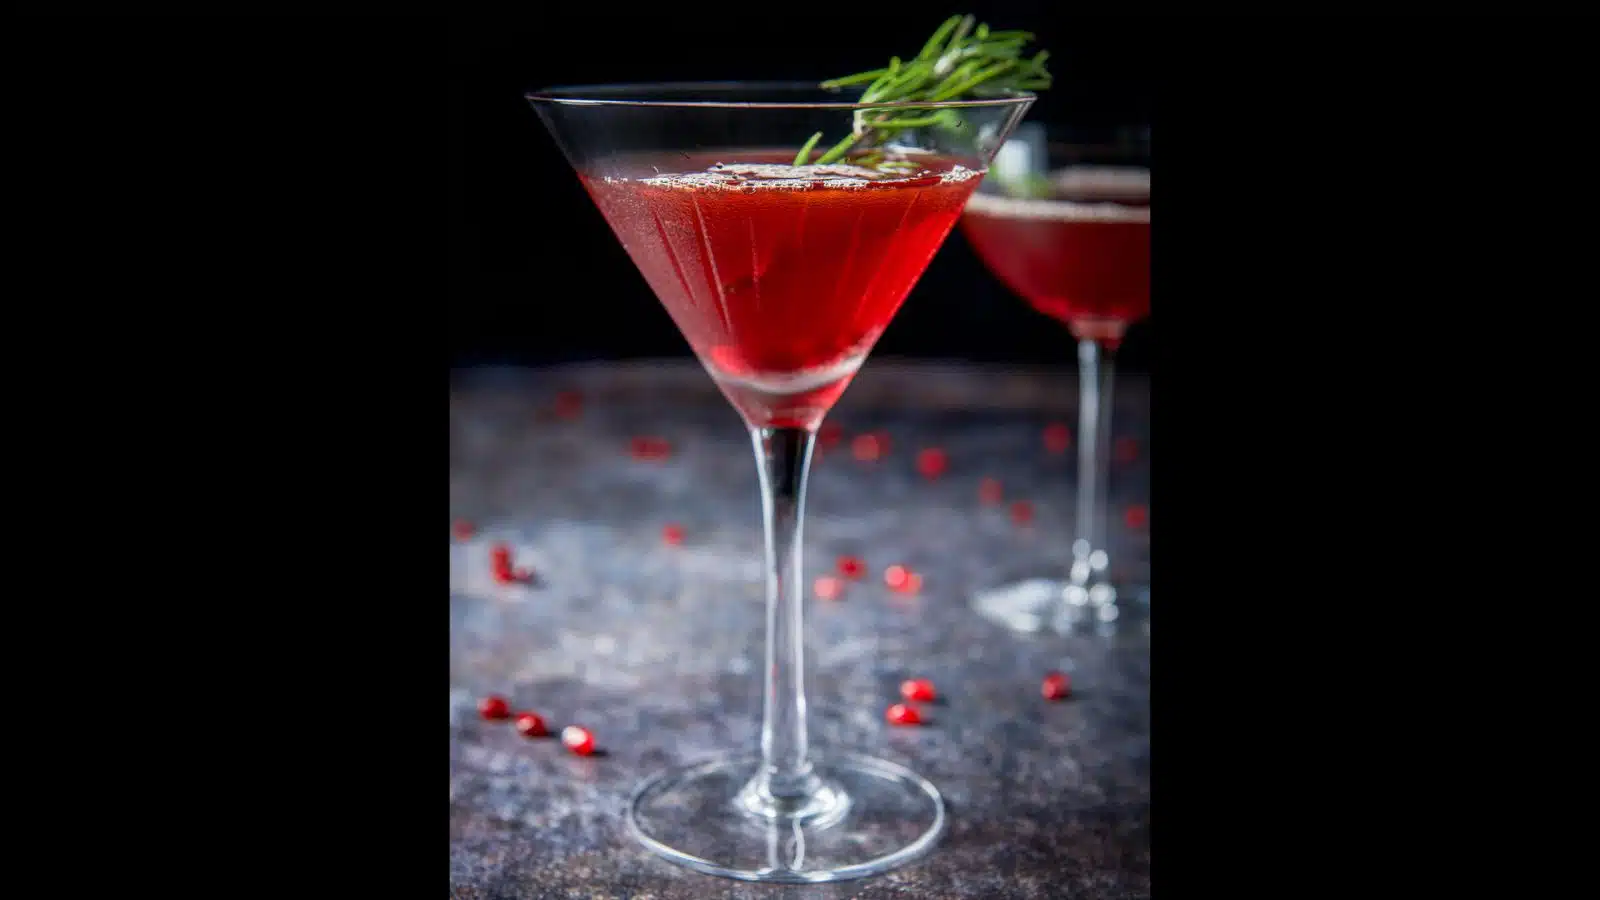 A beveled martini glass filled with the red cocktail with pomegranate seeds on the table and rosemary in the glass